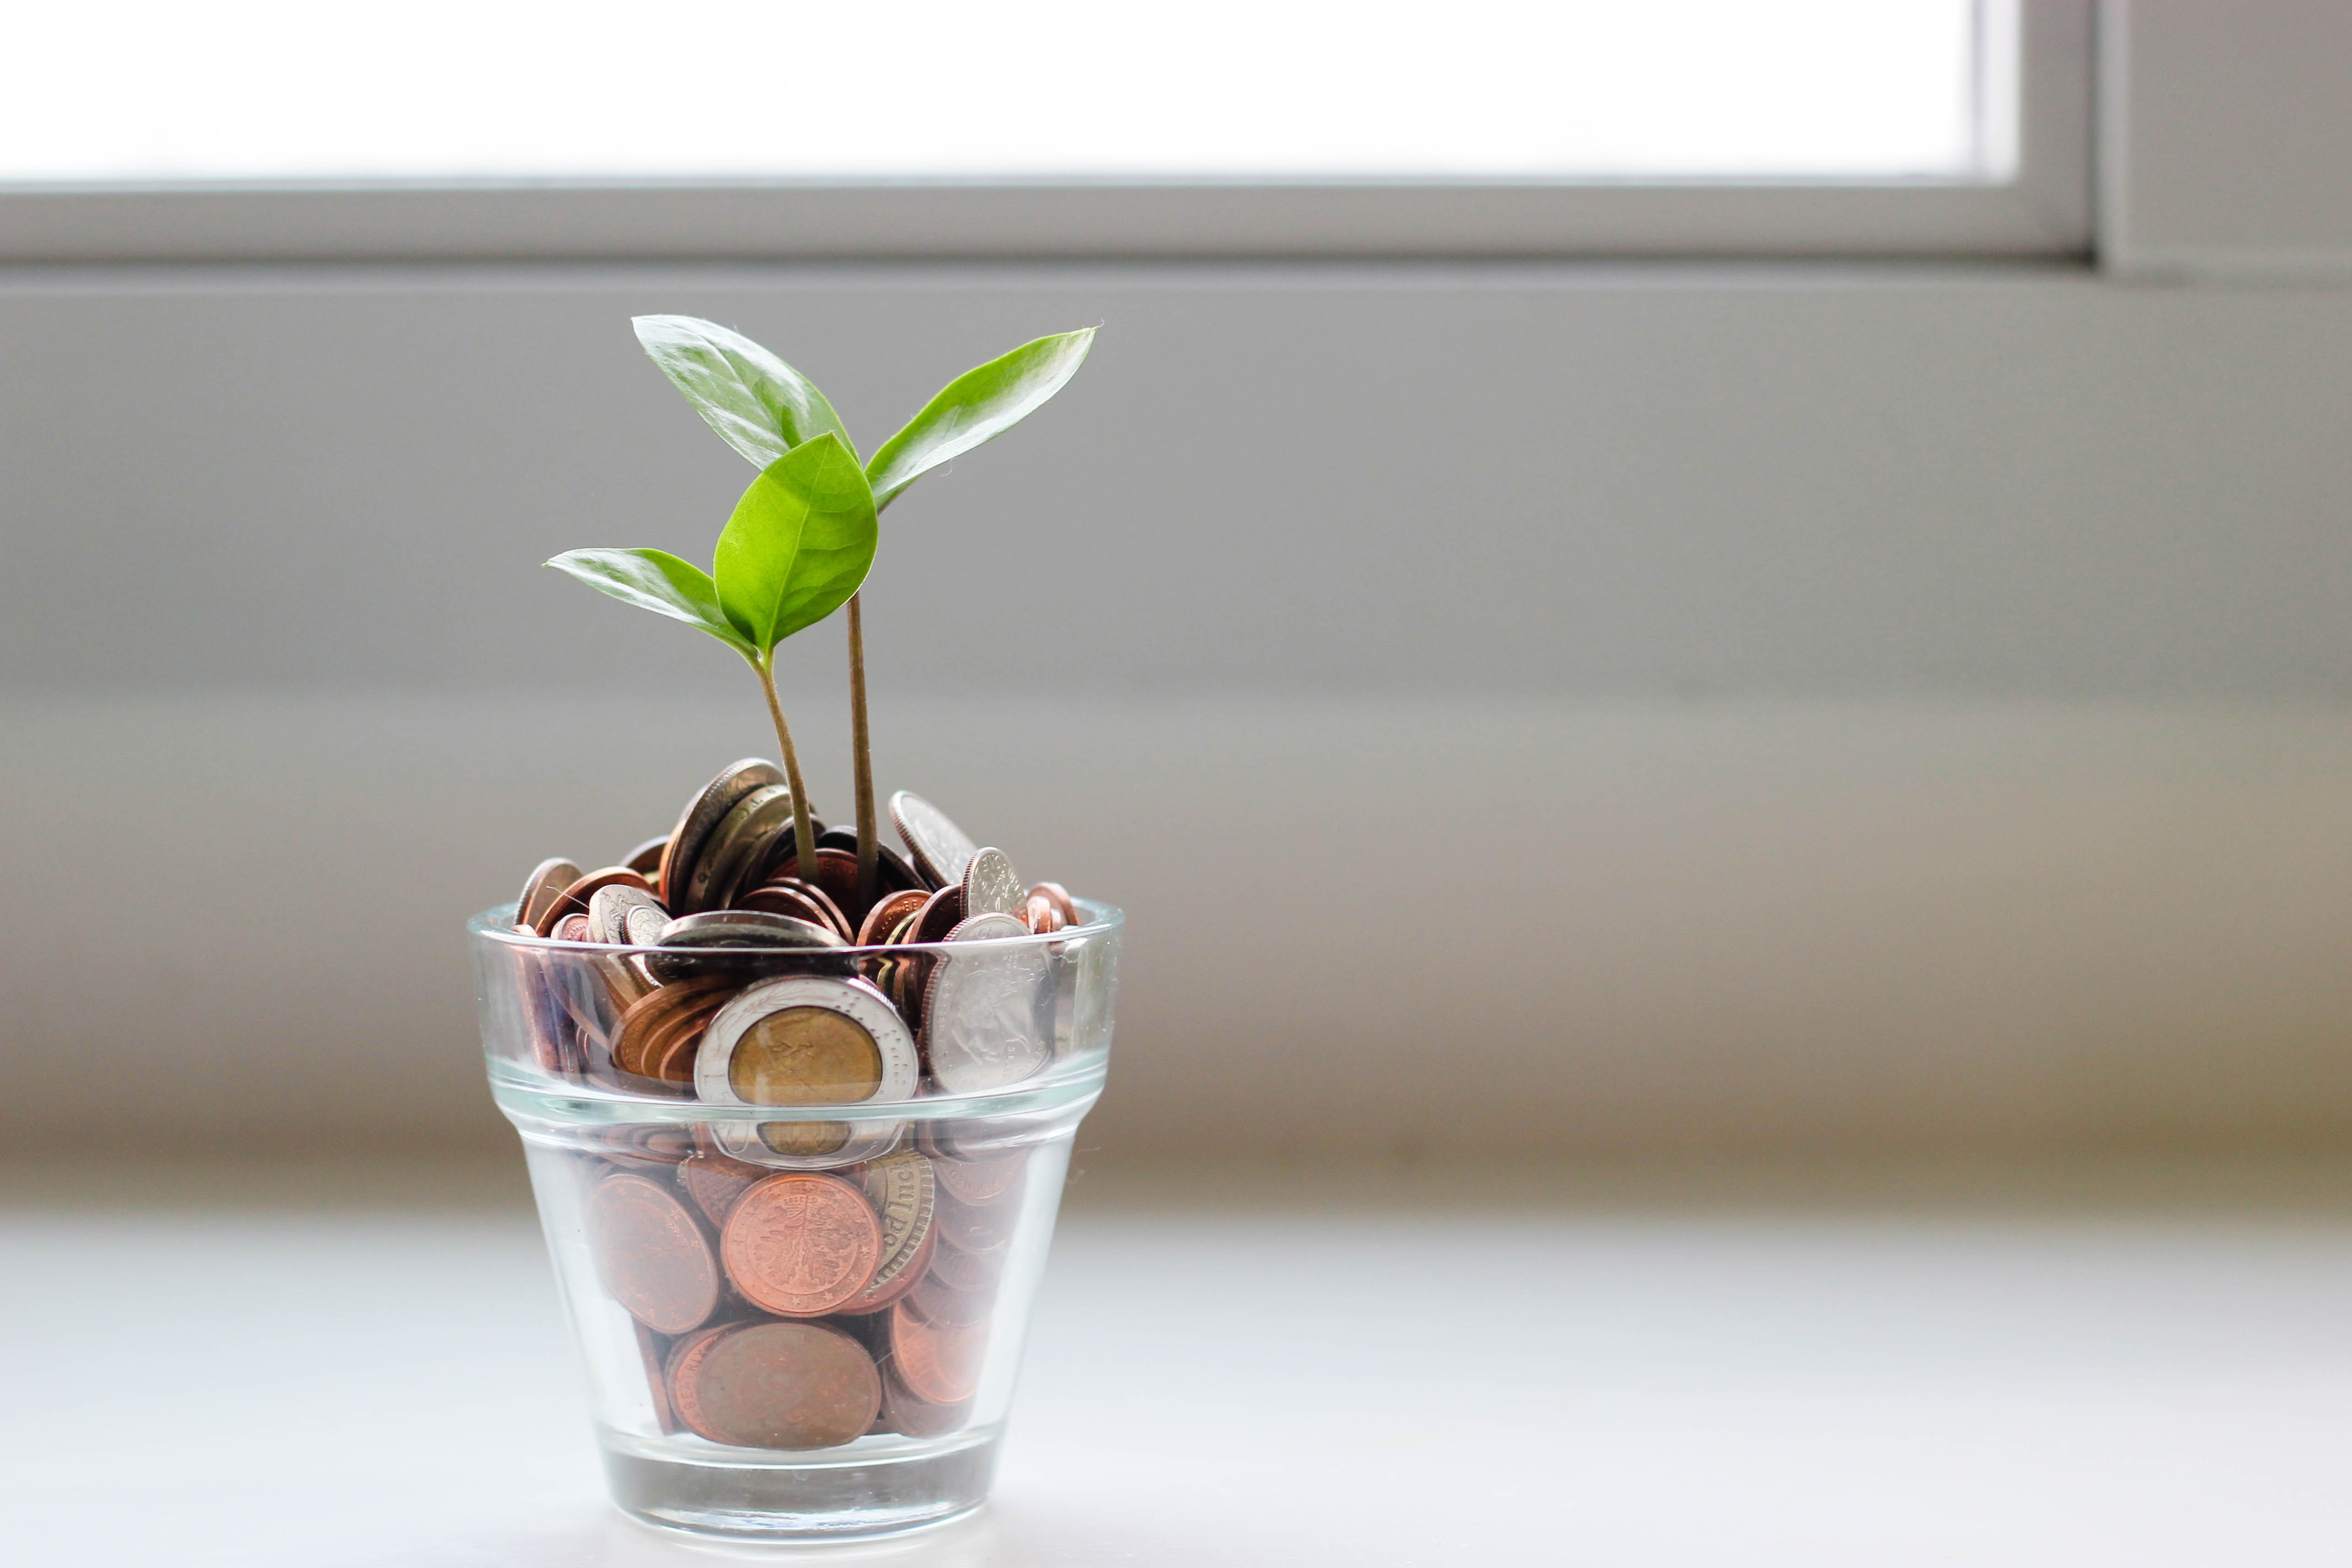 Plant growing out of glass full of money